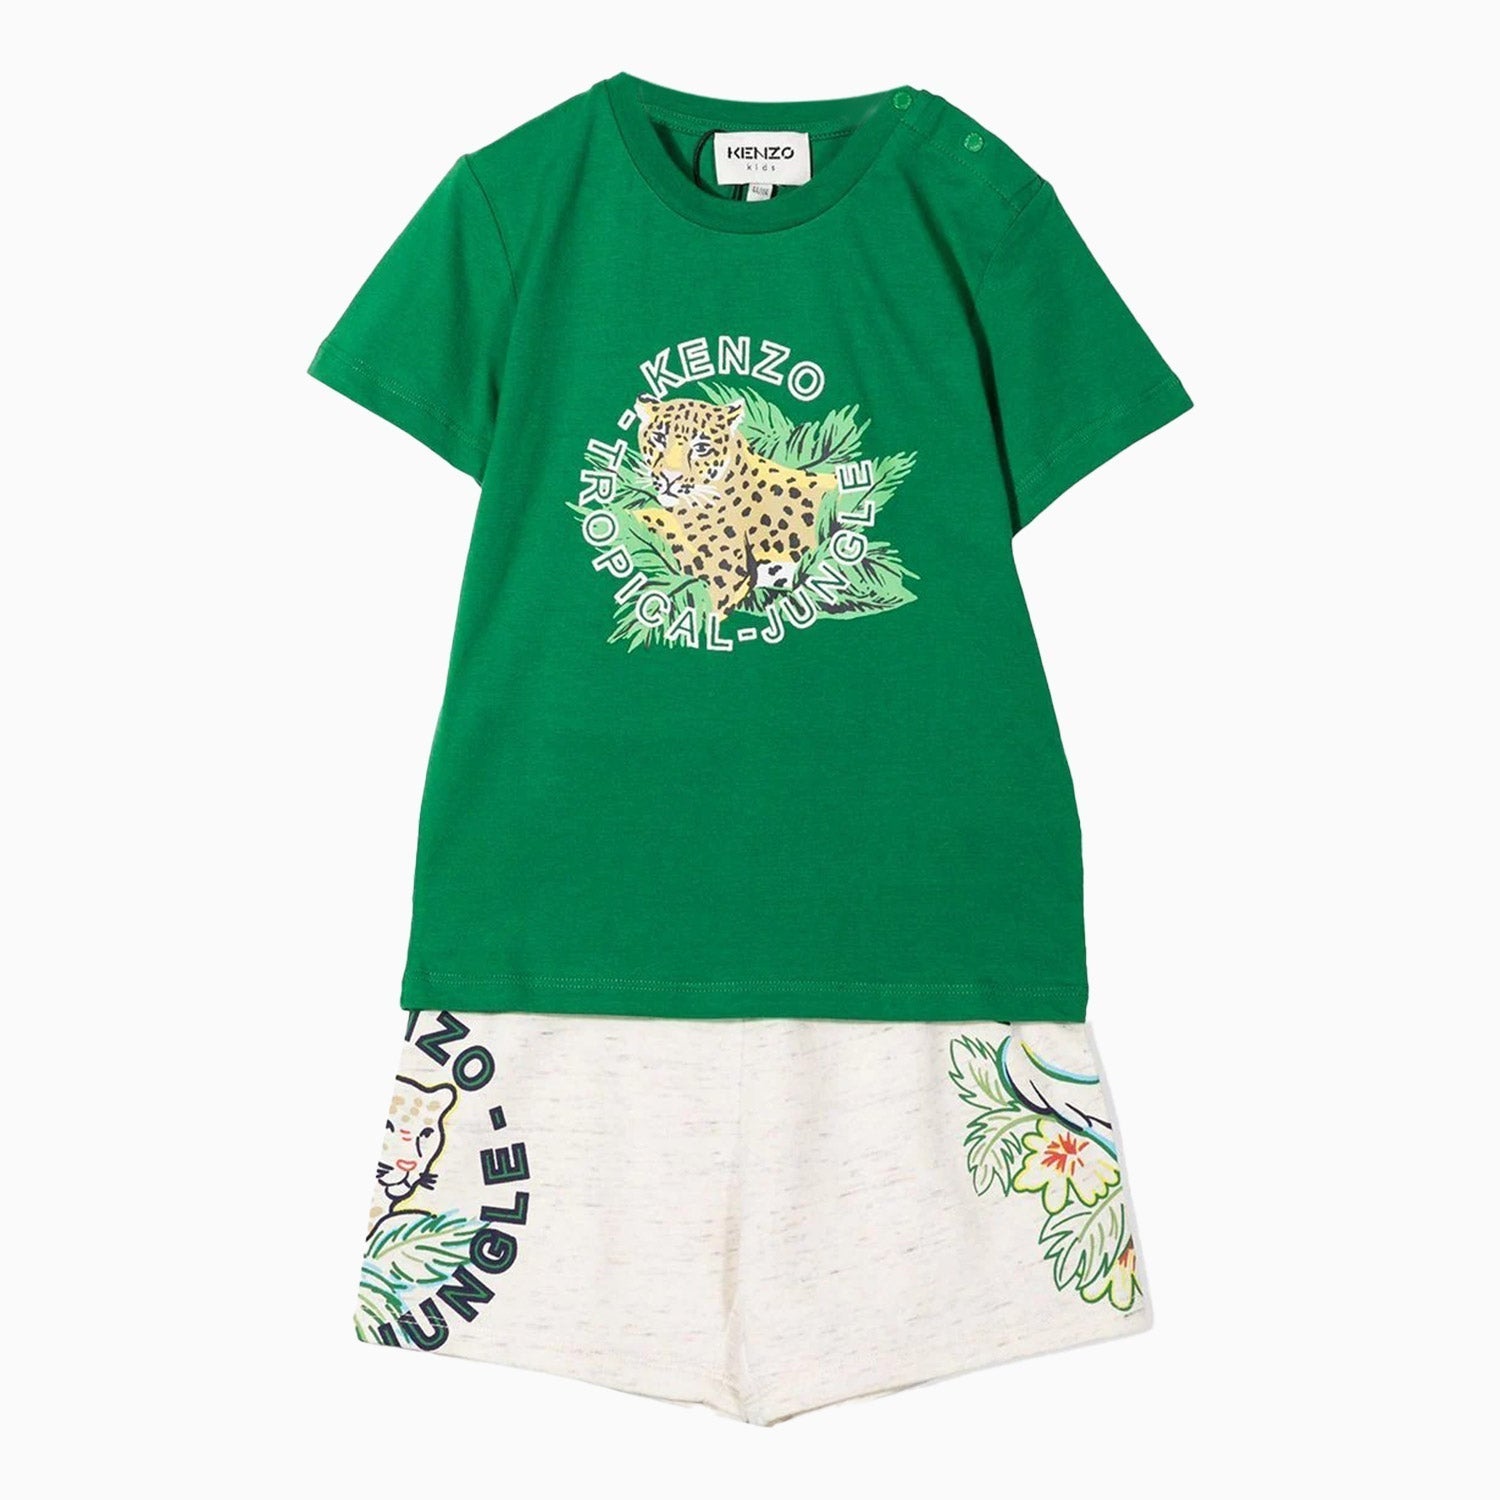 kenzo-kids-tropical-jungle-outfit-toddlers-k08041-719